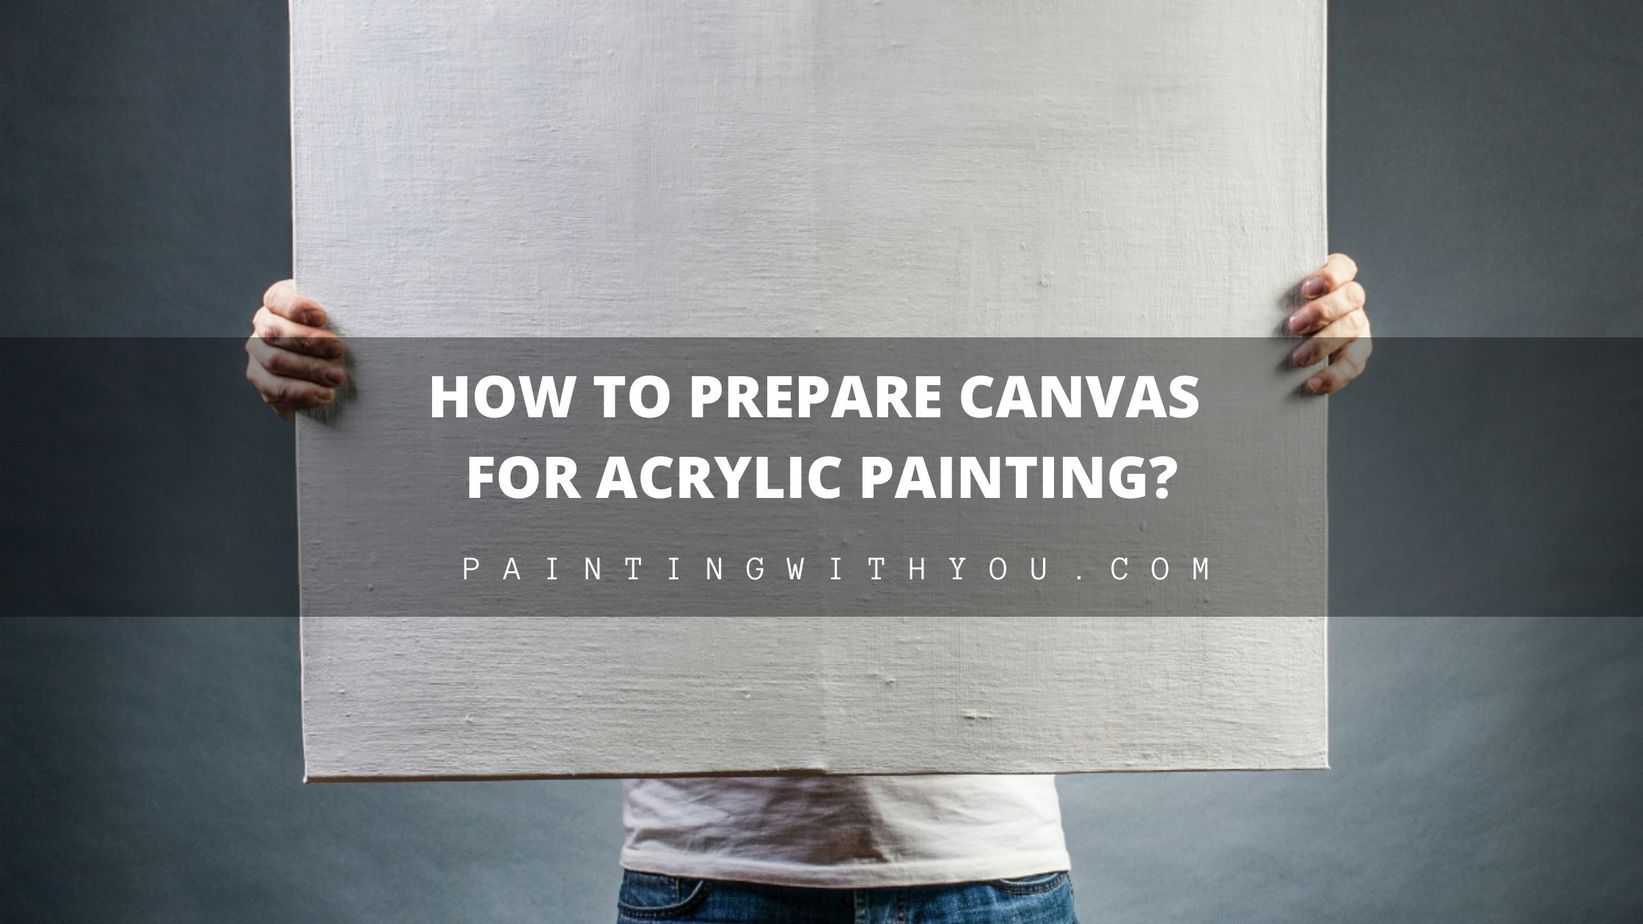 How to Prepare a Canvas for Acrylic Painting? - Painting With You